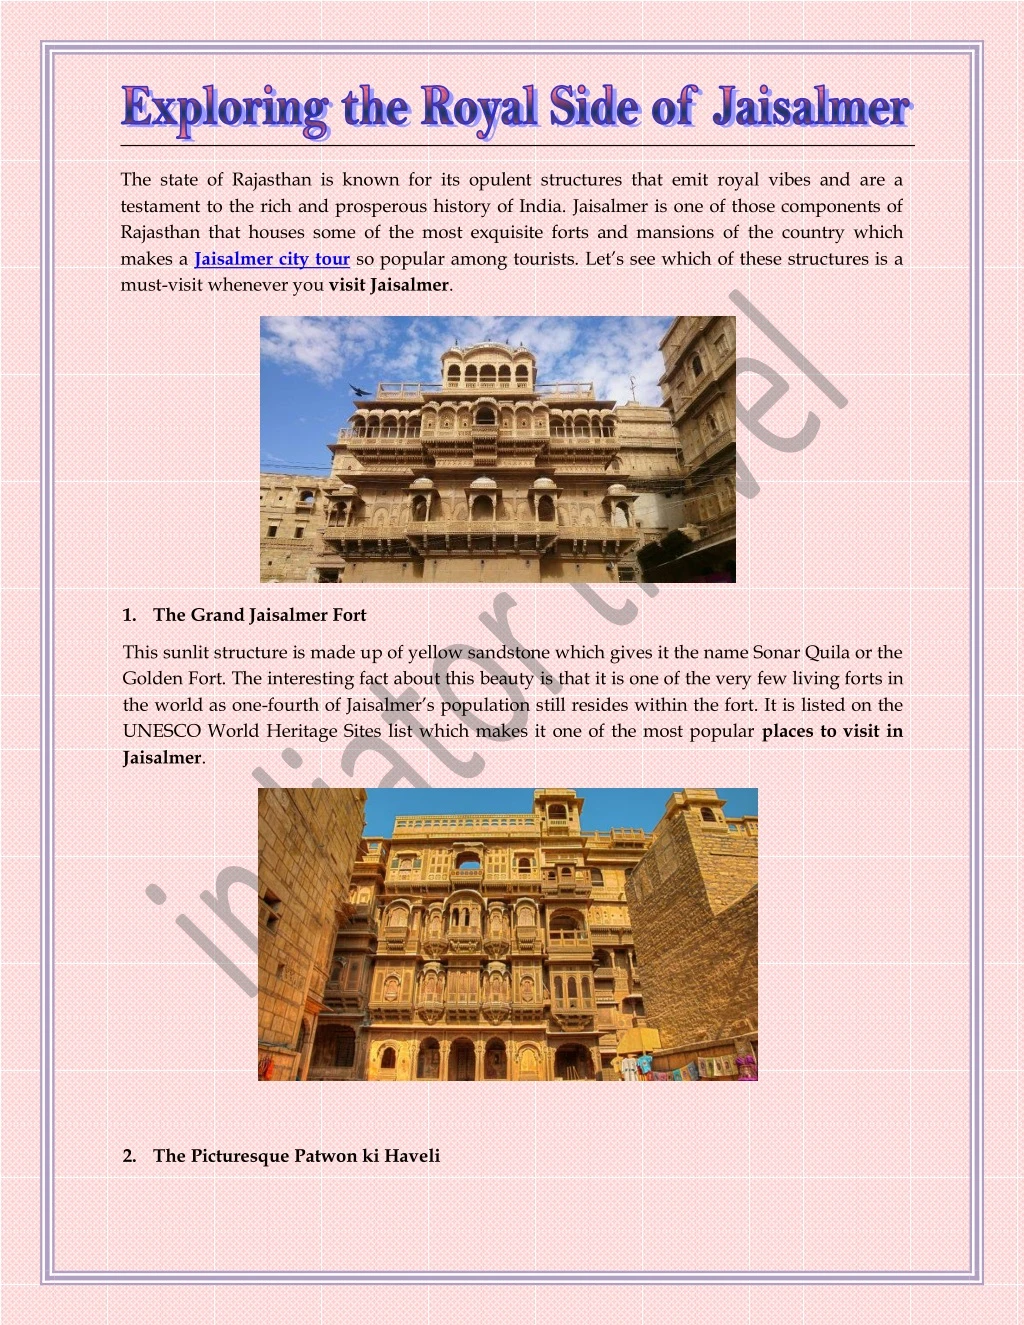 the state of rajasthan is known for its opulent